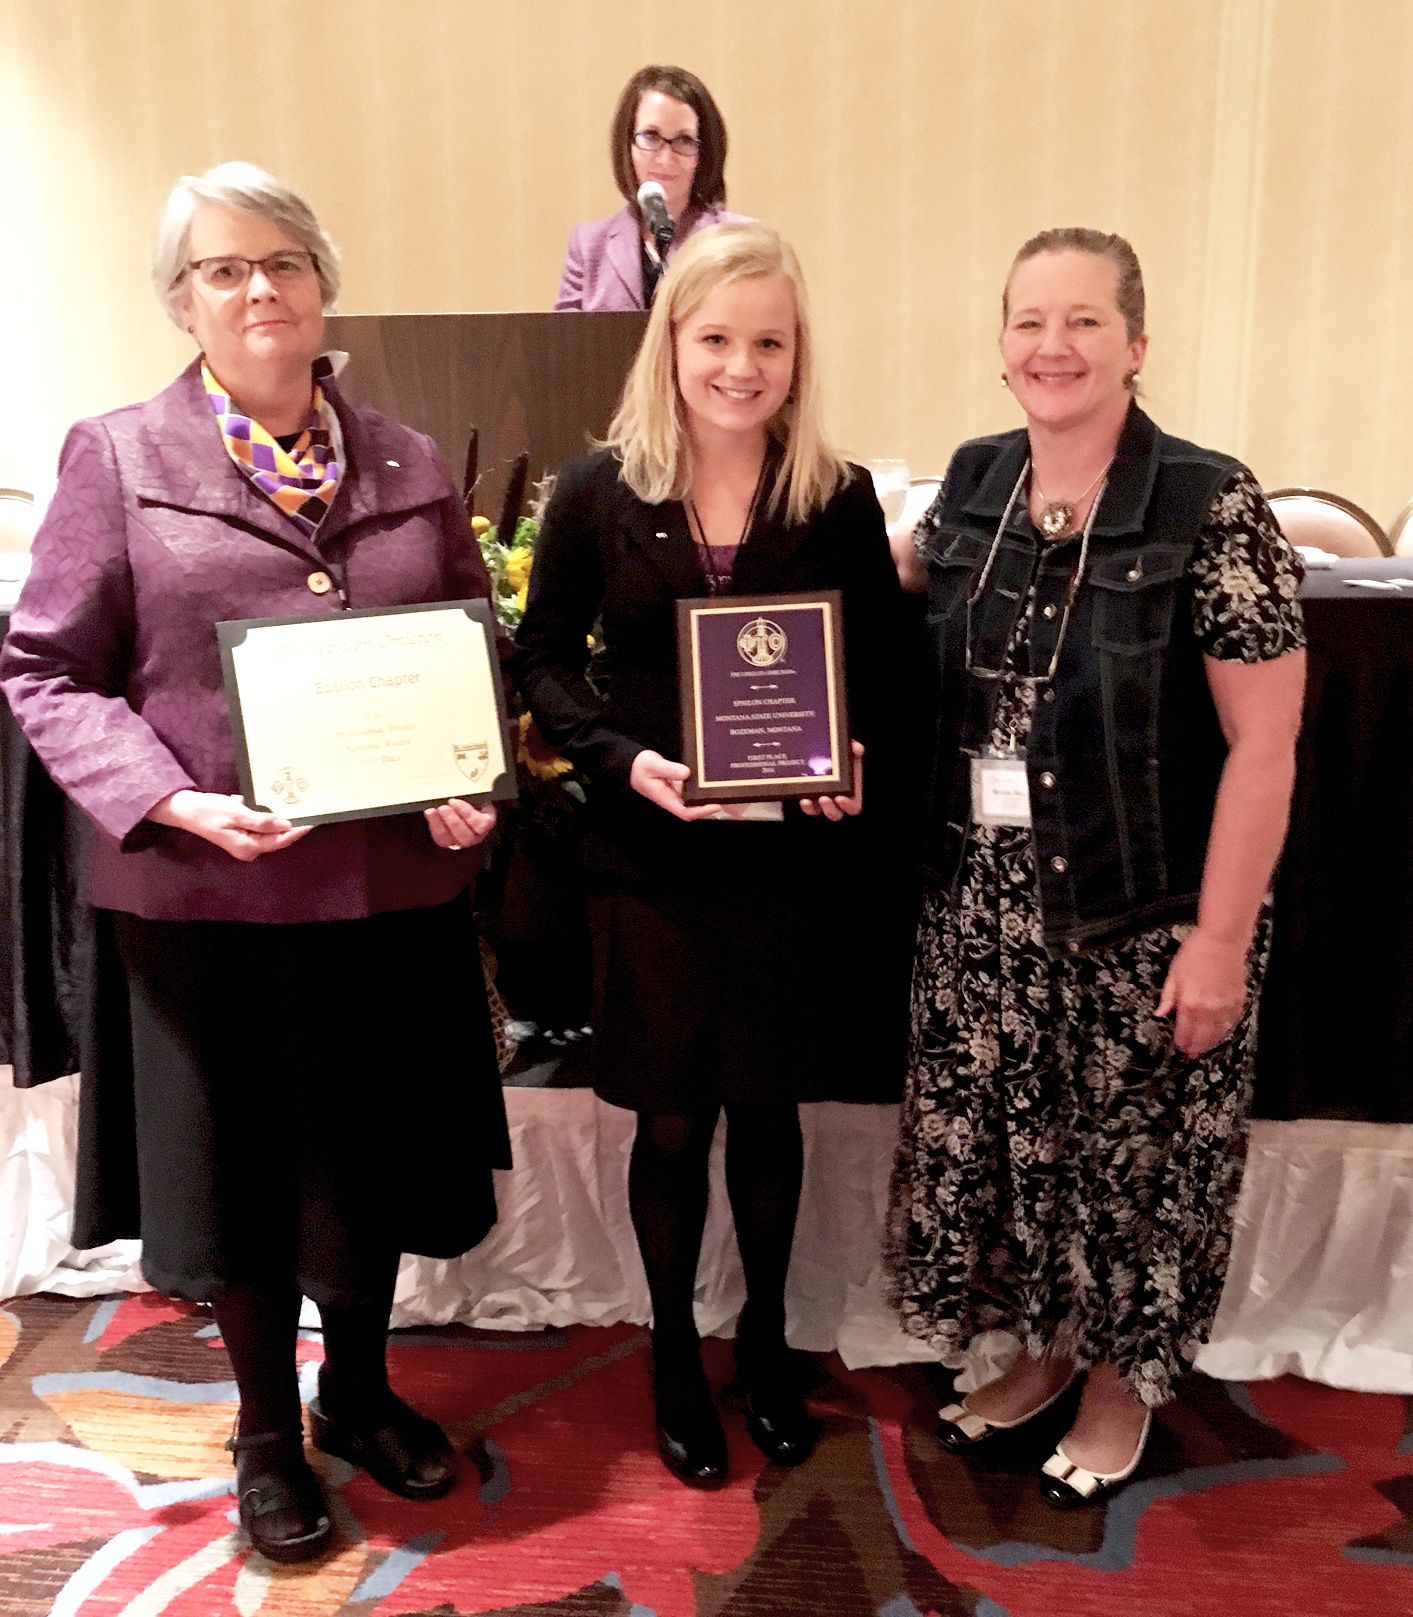 Dr. Sandy Osborne and Sierra Smith accept award on behalf of Phi Upsilon Omicron for professional project at national competition